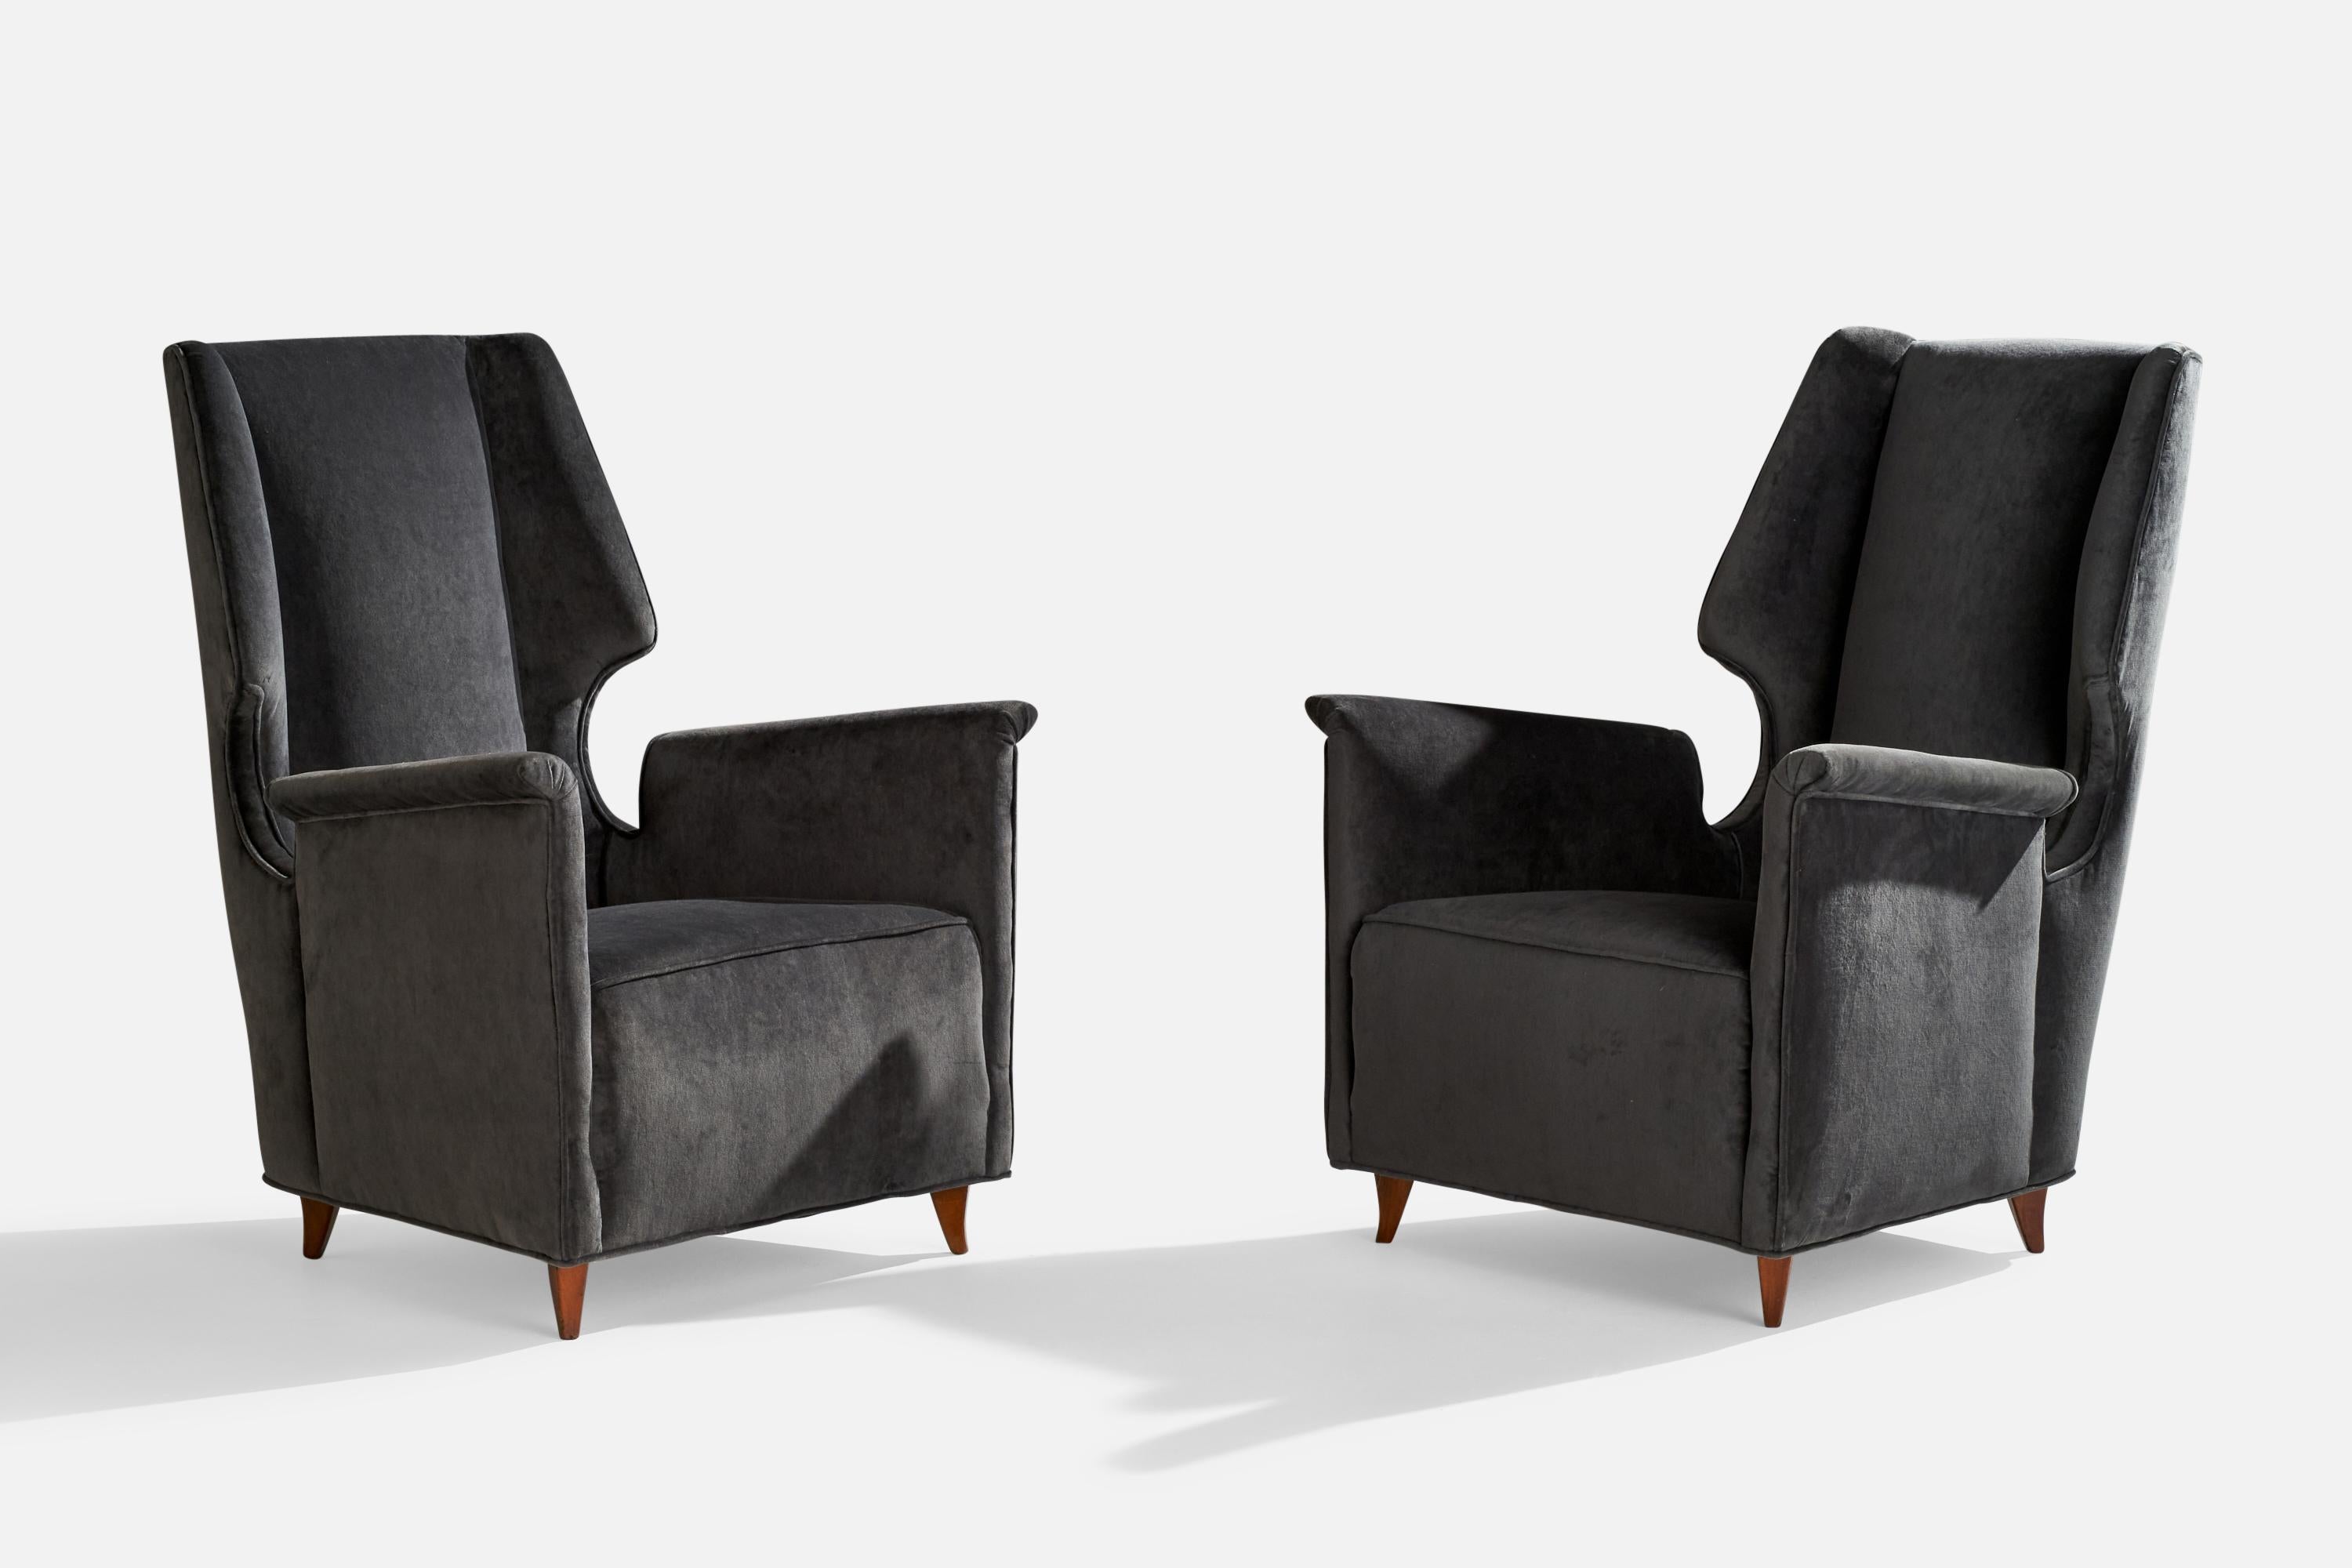 A pair of wood and dark grey velvet lounge chairs designed and produced in Italy, 1950s.

seat height 15.56” 